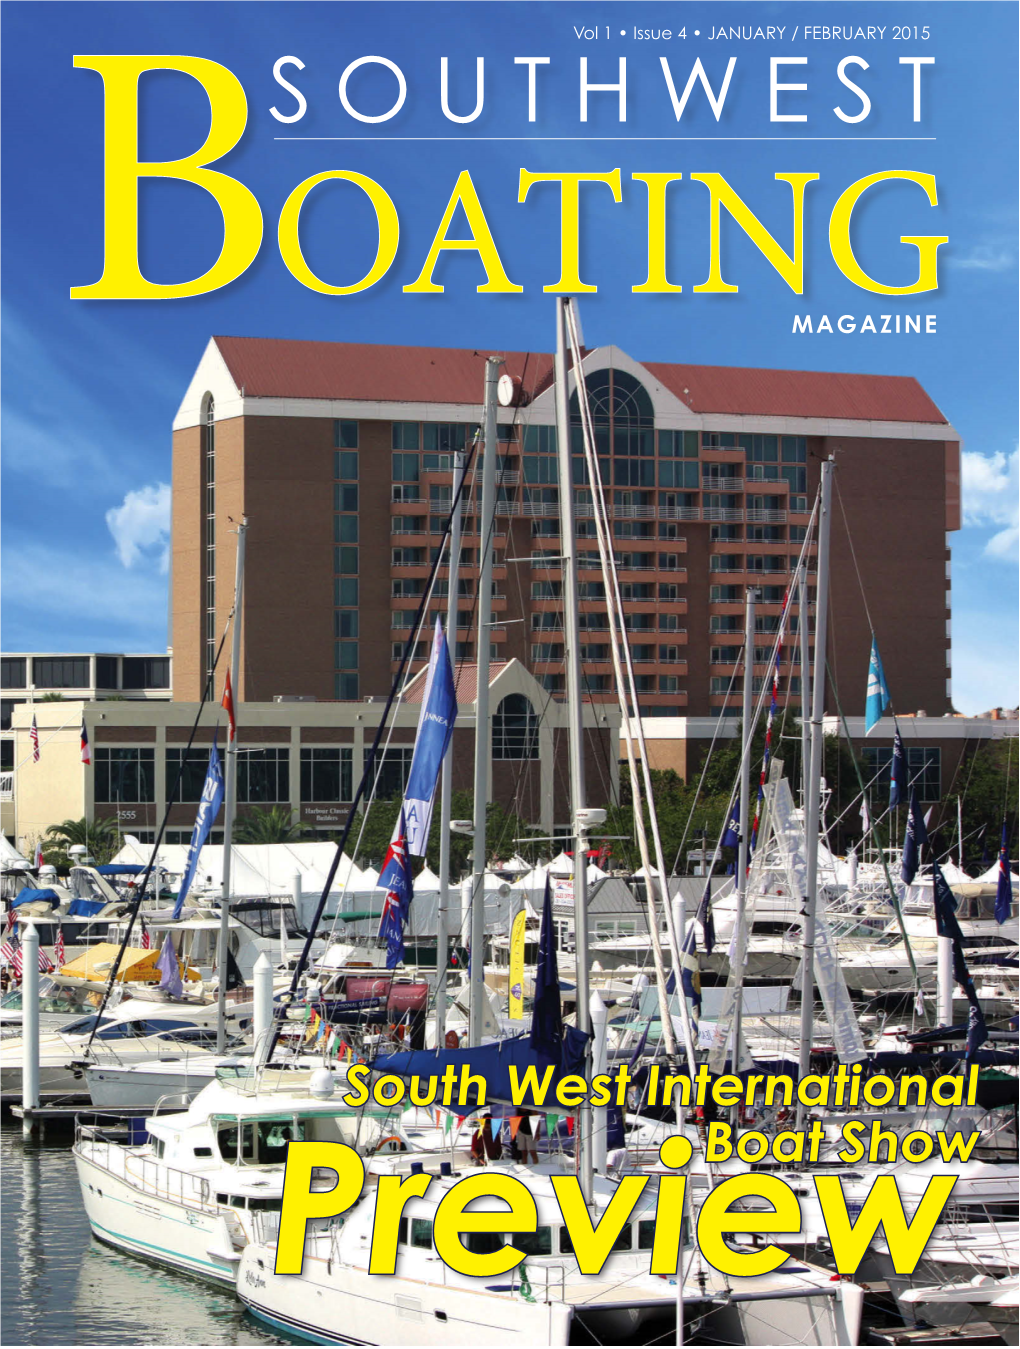 Southwest Boating Magazine Is Published Bi-Monthly, Online, By: South West International Boat Show, Inc